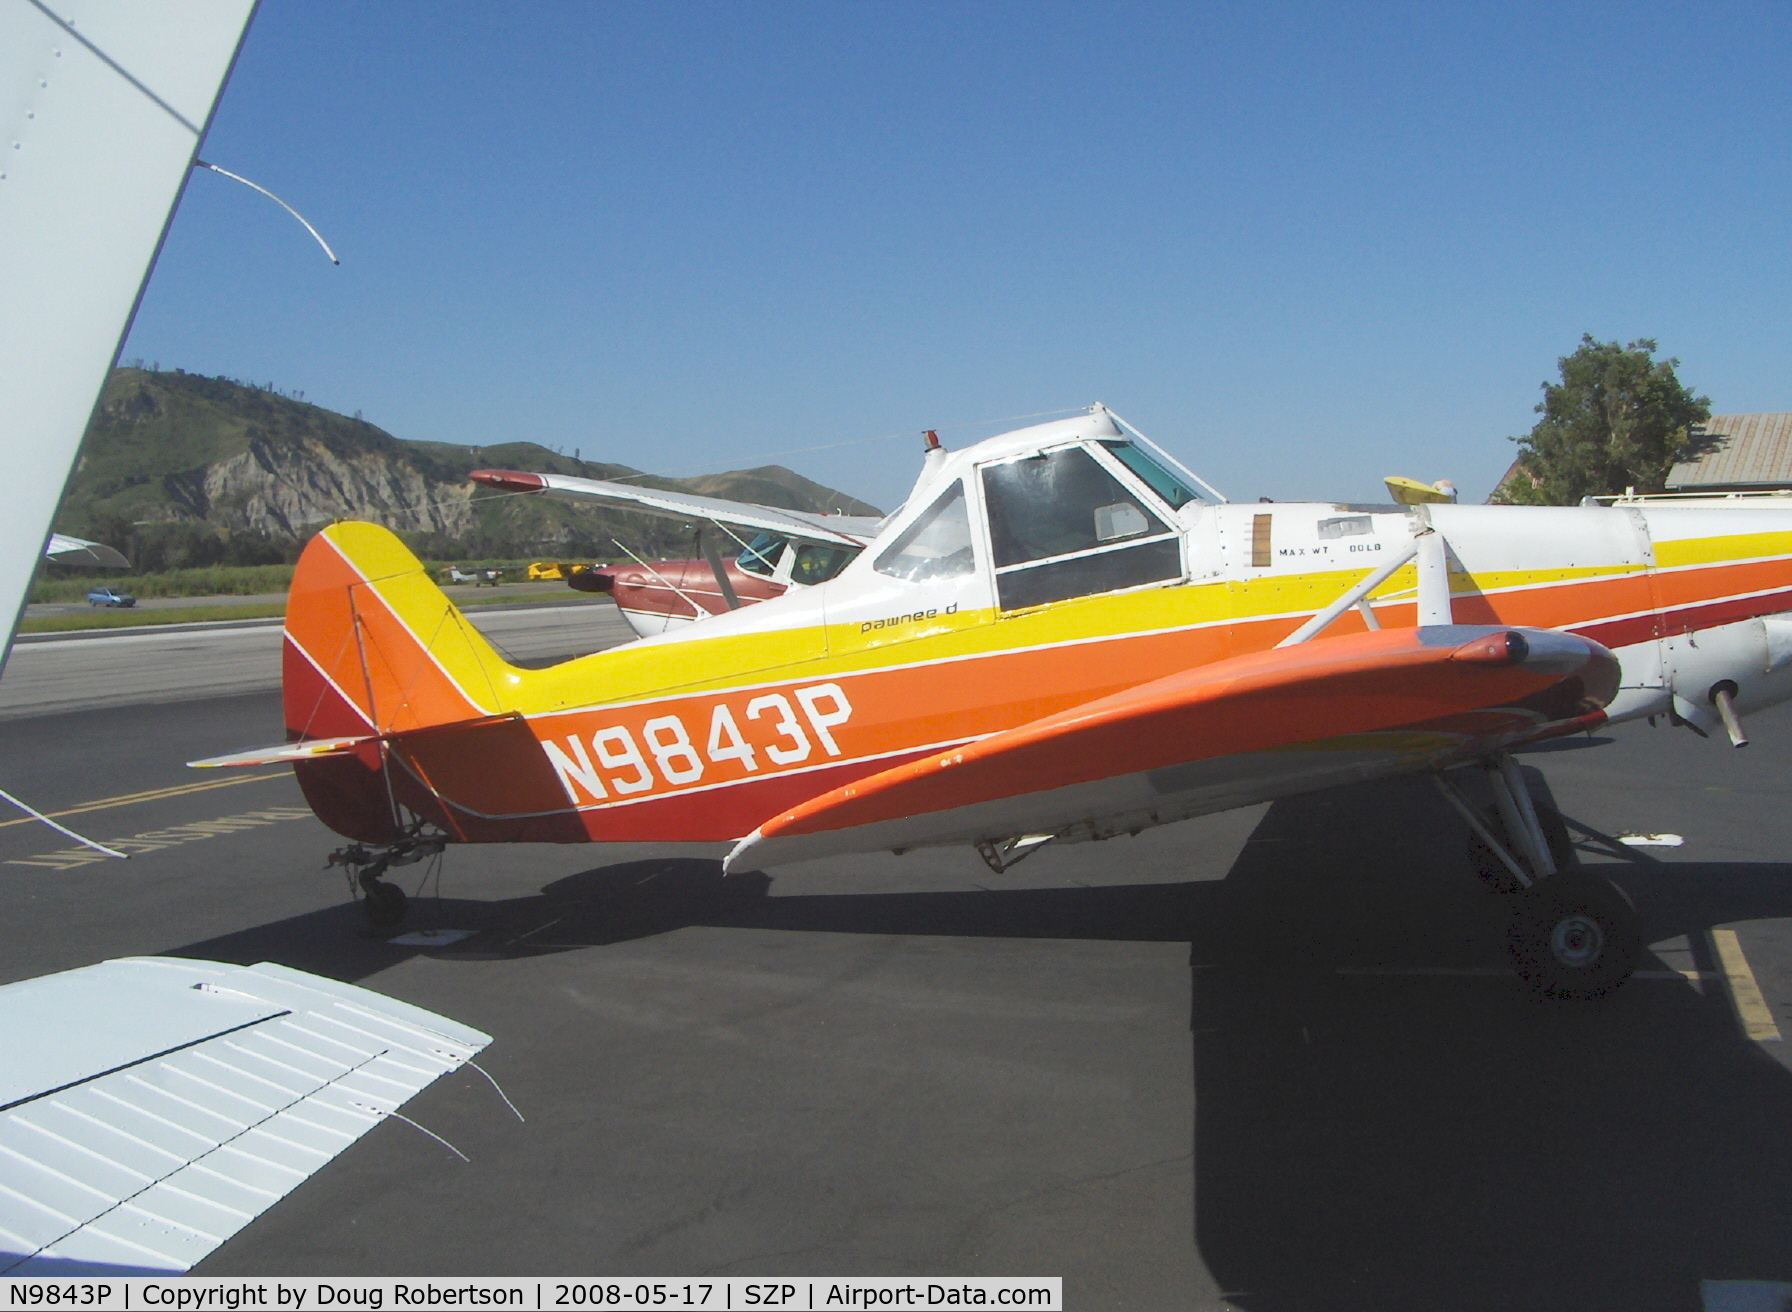 N9843P, 1975 Piper PA-25-235 C/N 25-7556161, 1975 Piper PA-25-235 PAWNEE D aerial applicator (cropduster), Lycoming O-540-B2B5 235 Hp (derated), Restricted class. Note wirecutter just ahead of windscreen